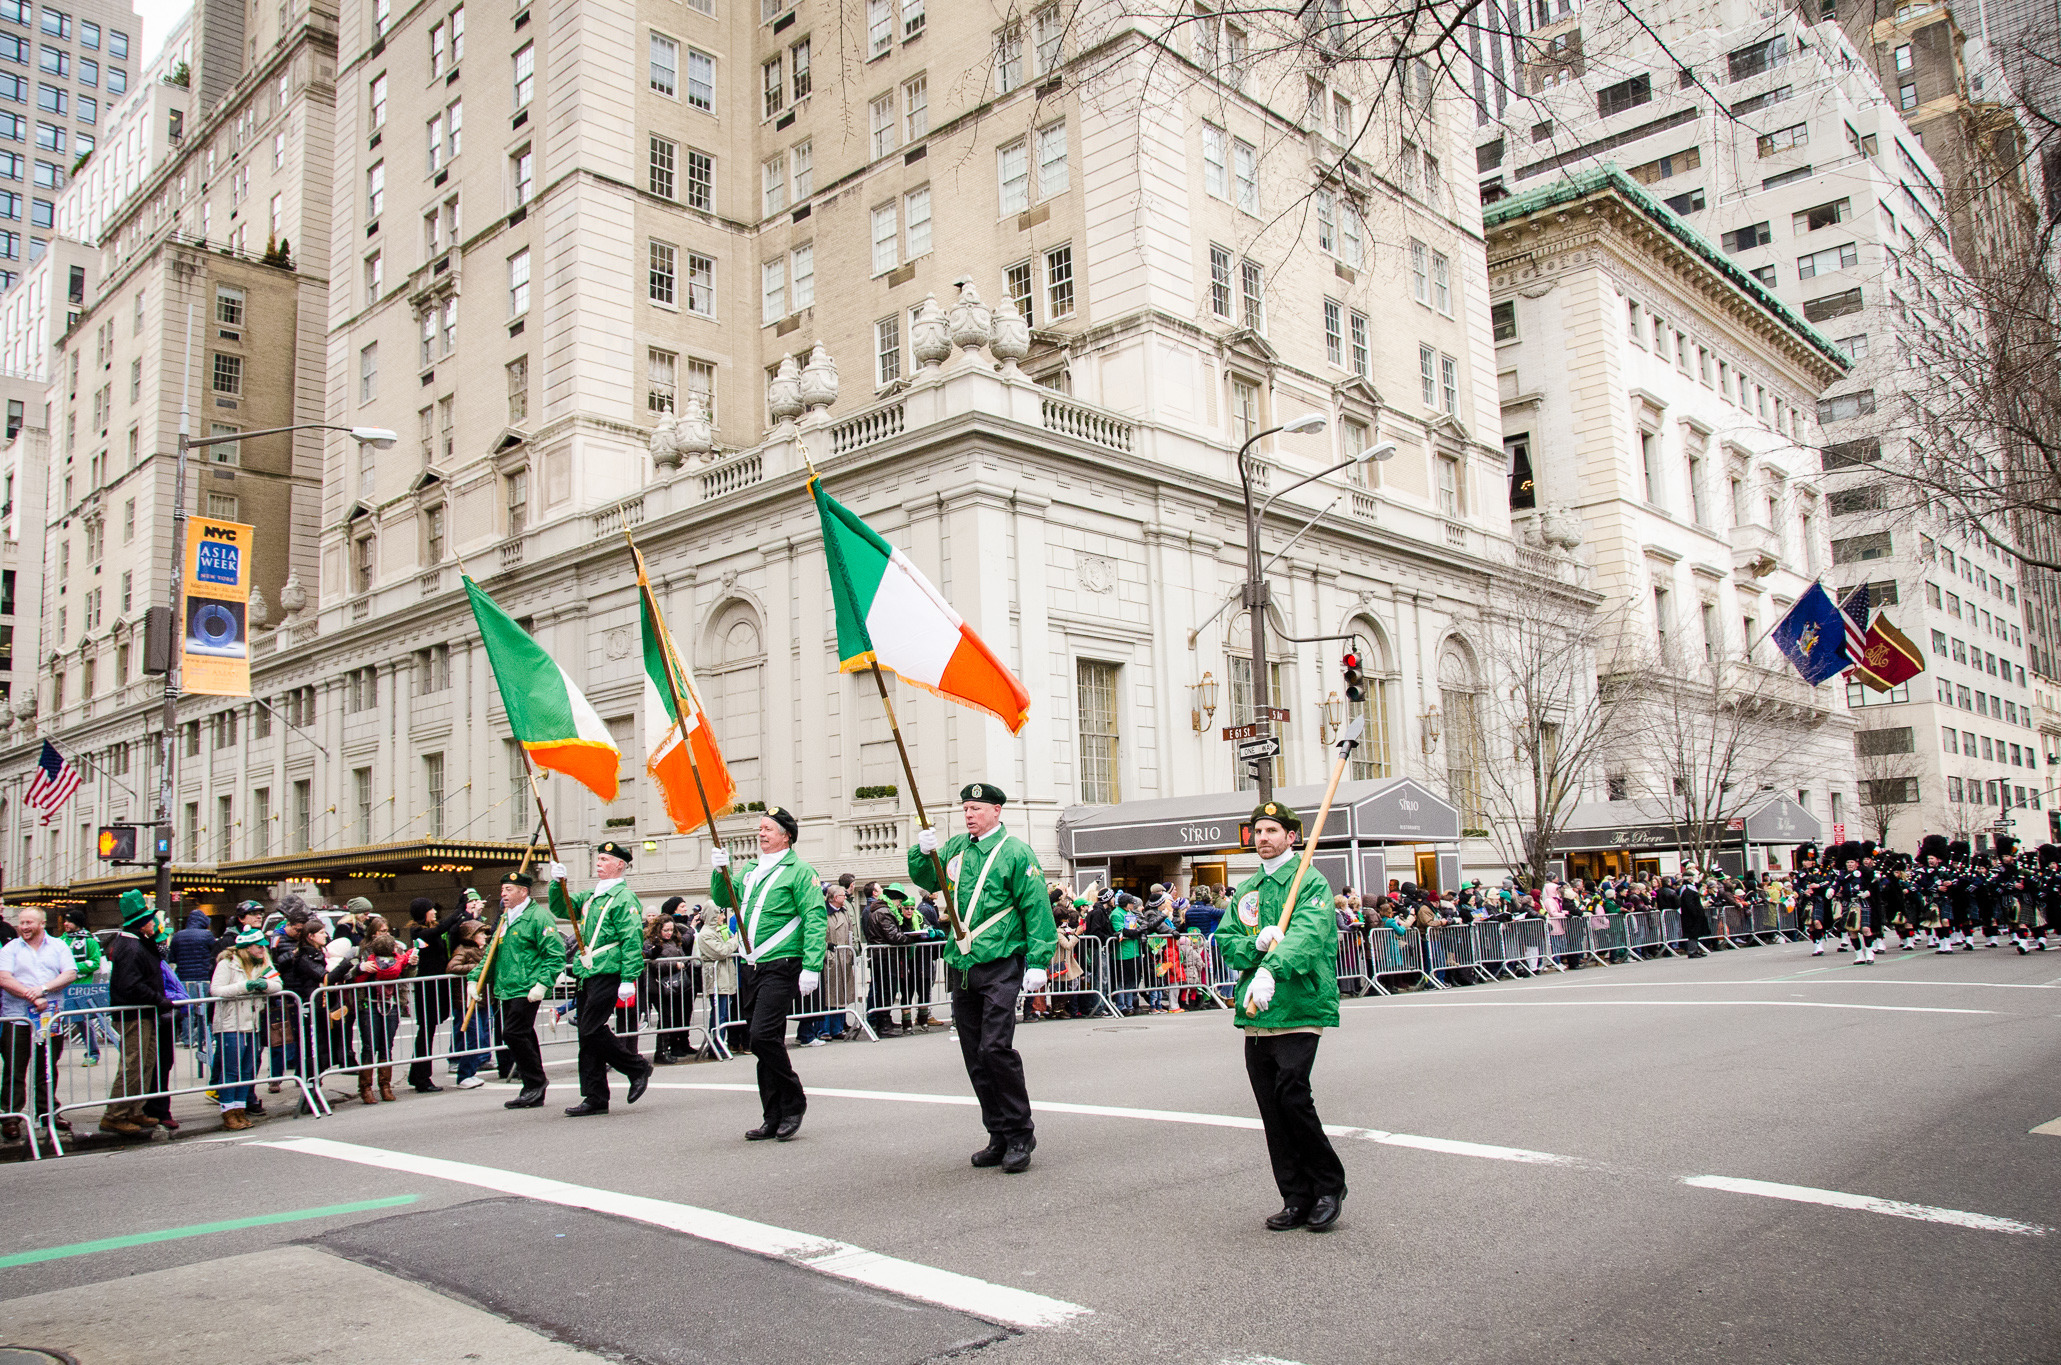 The first St. Patrick's Day parade in the U.S. was actually held